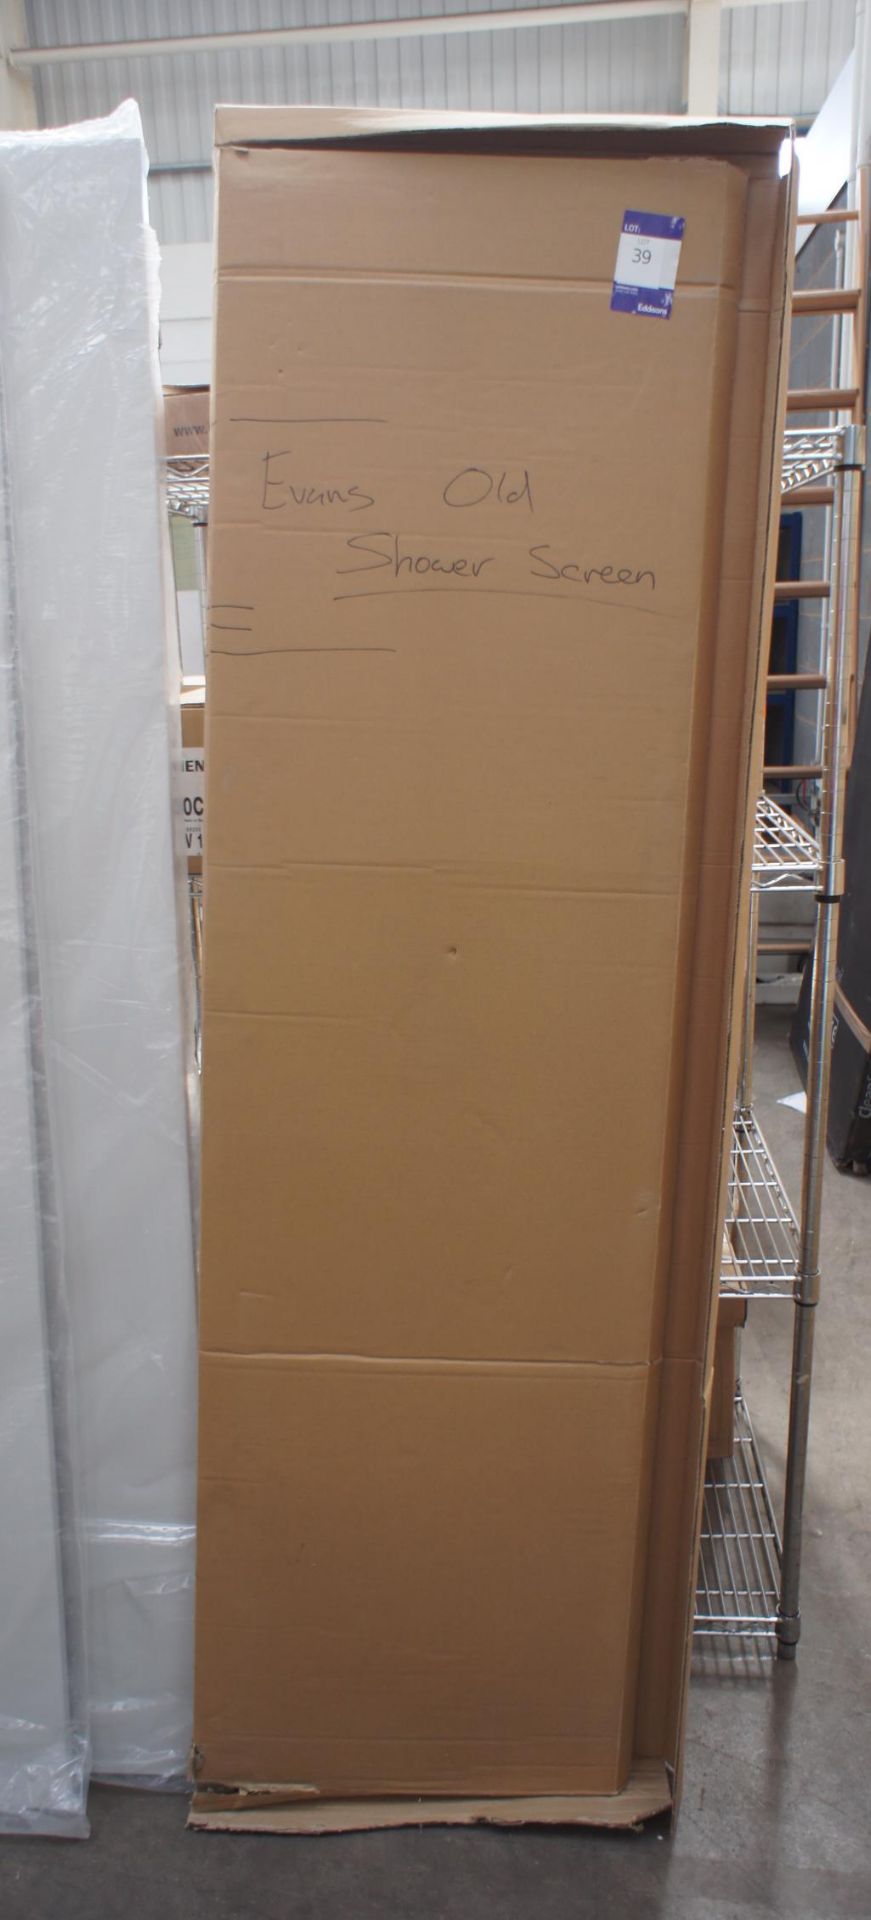 Glazed Shower Screen, to Box - Image 3 of 3